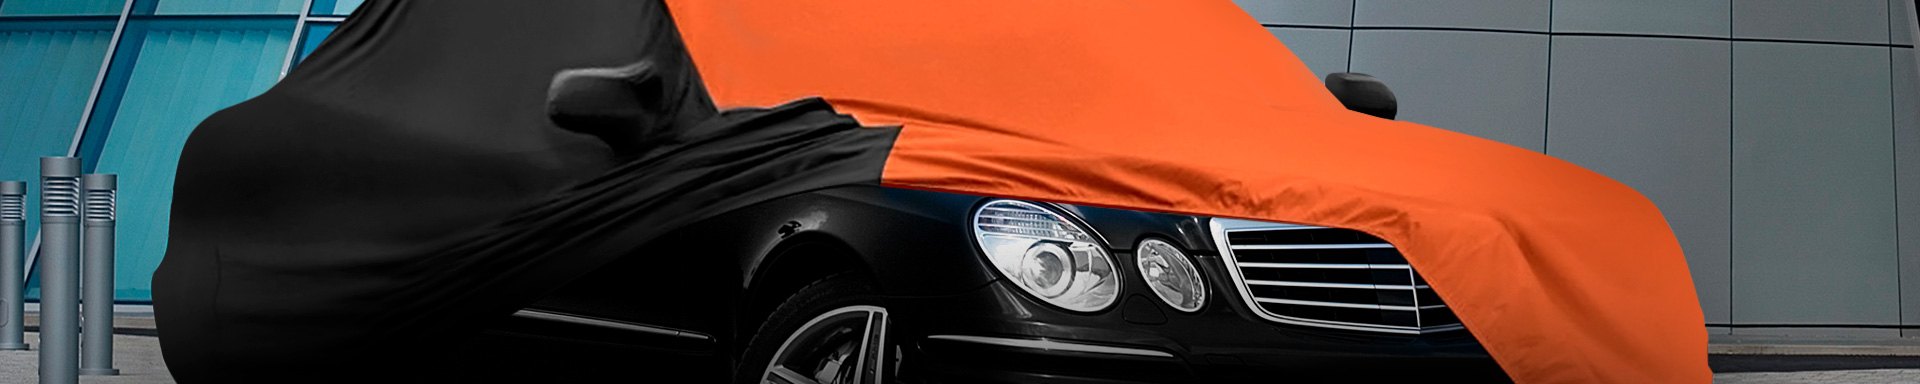 Coverking Satin Stretch Indoor Covers are Now Available In Inferno Orange Color